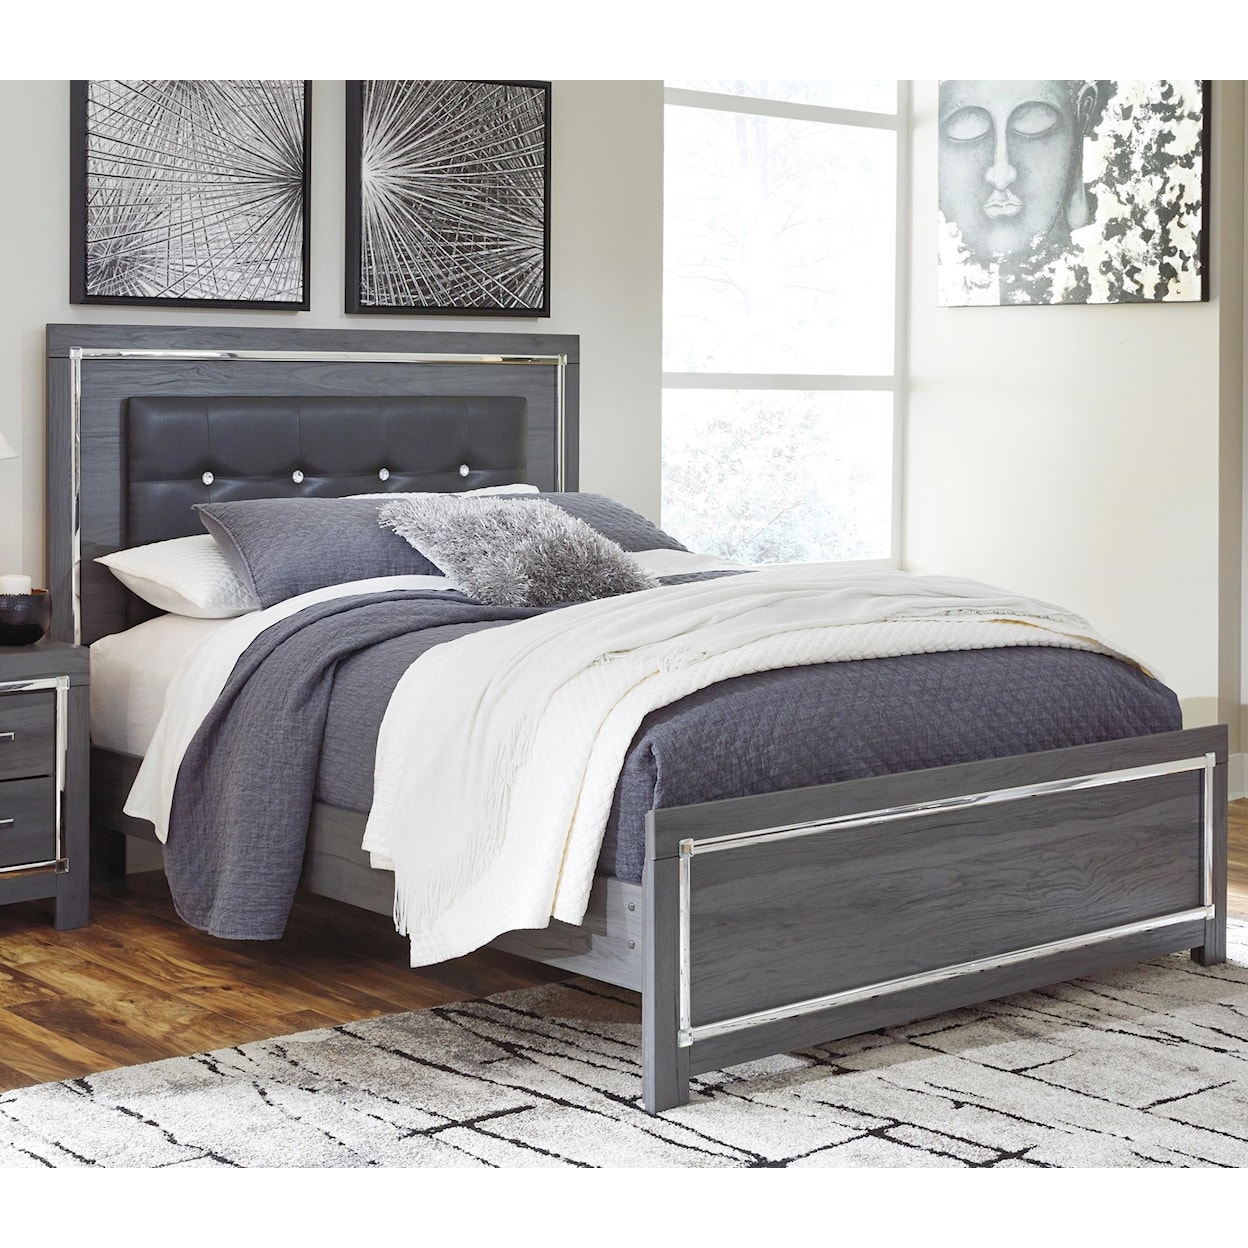 Signature Design by Ashley Lodanna Queen Upholstered Bed